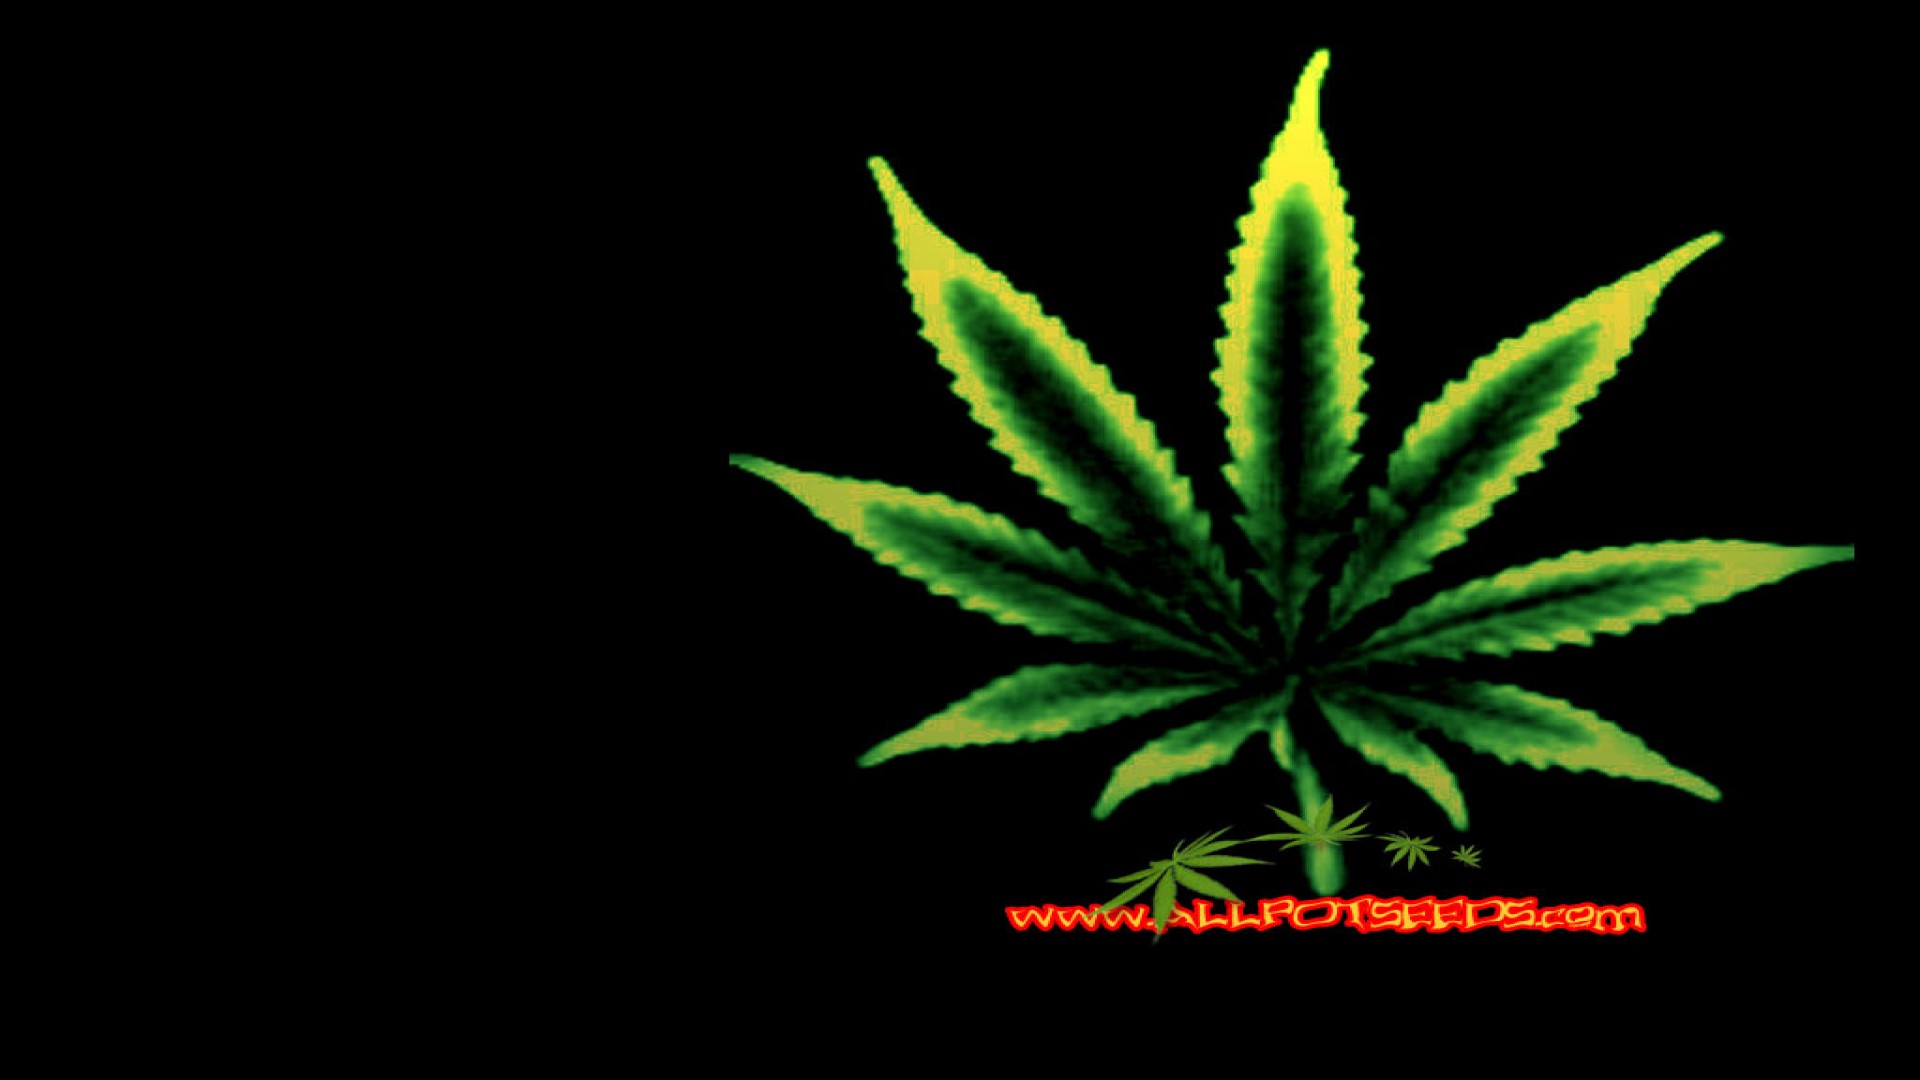 Free download Black Weed Wallpaper 2560x1440 HD Wallpaper [2560x1440] for your Desktop, Mobile & Tablet. Explore Weed Wallpaper. Moving Weed Wallpaper, Weed Wallpaper Tumblr, Weed Image Wallpaper